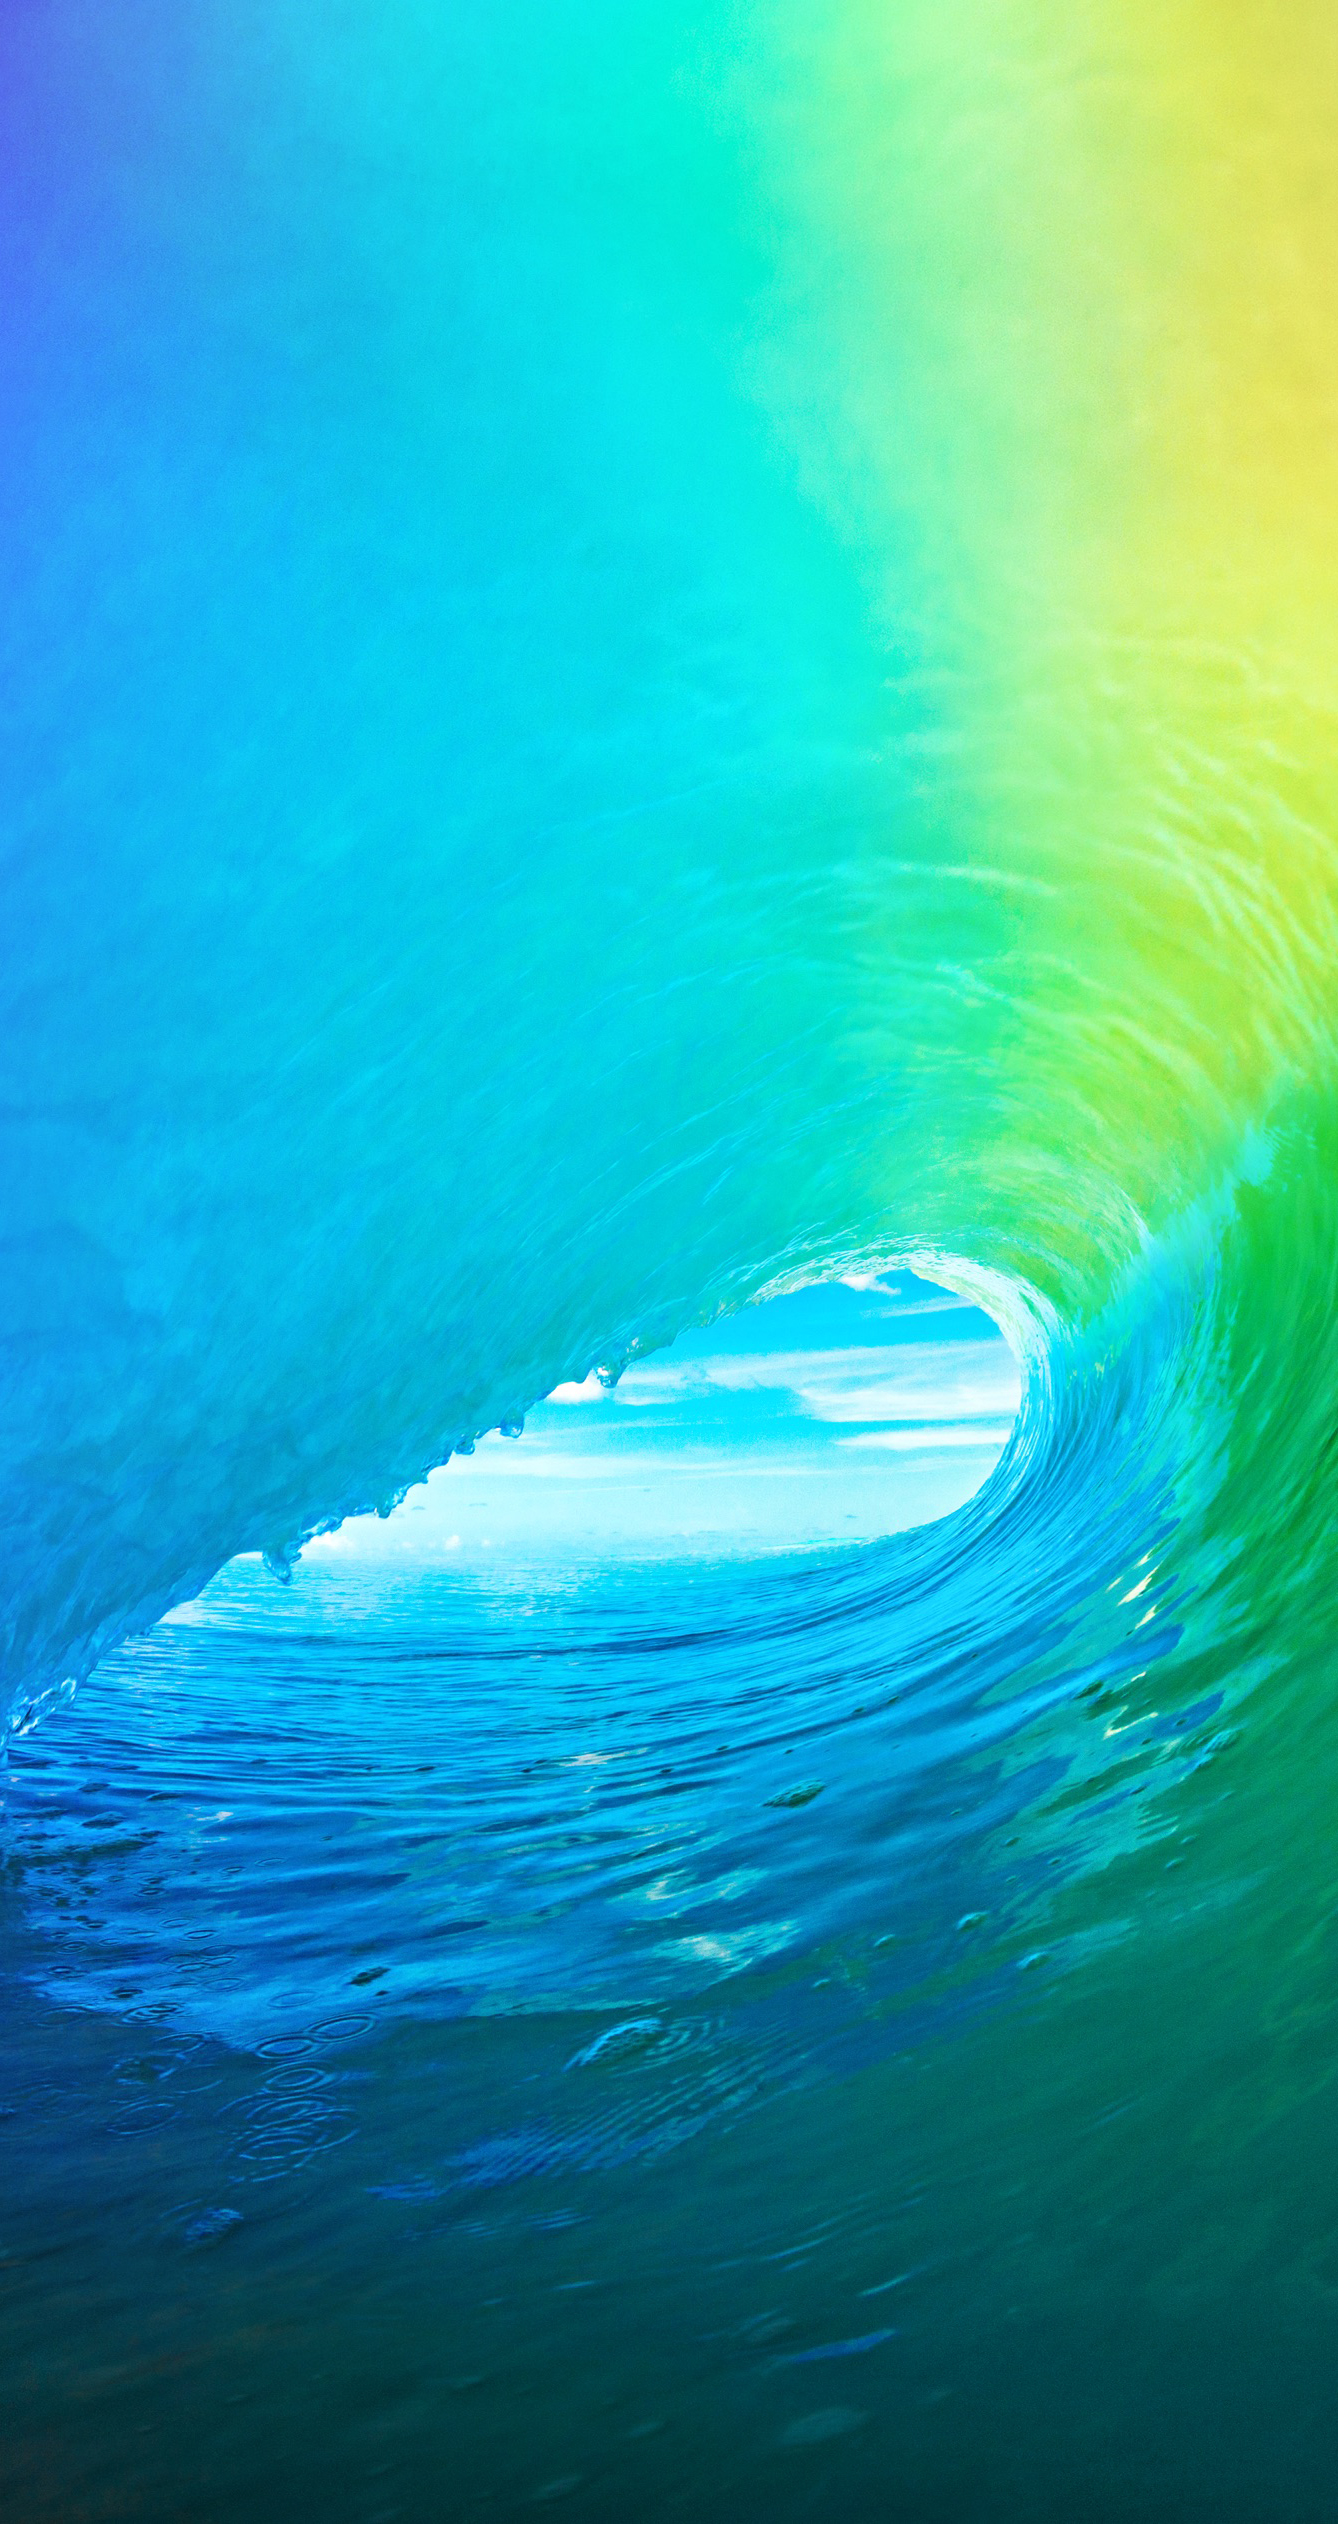 Download The Colored Wave Default IOS 9 Wallpaper IPhoneTricksorg